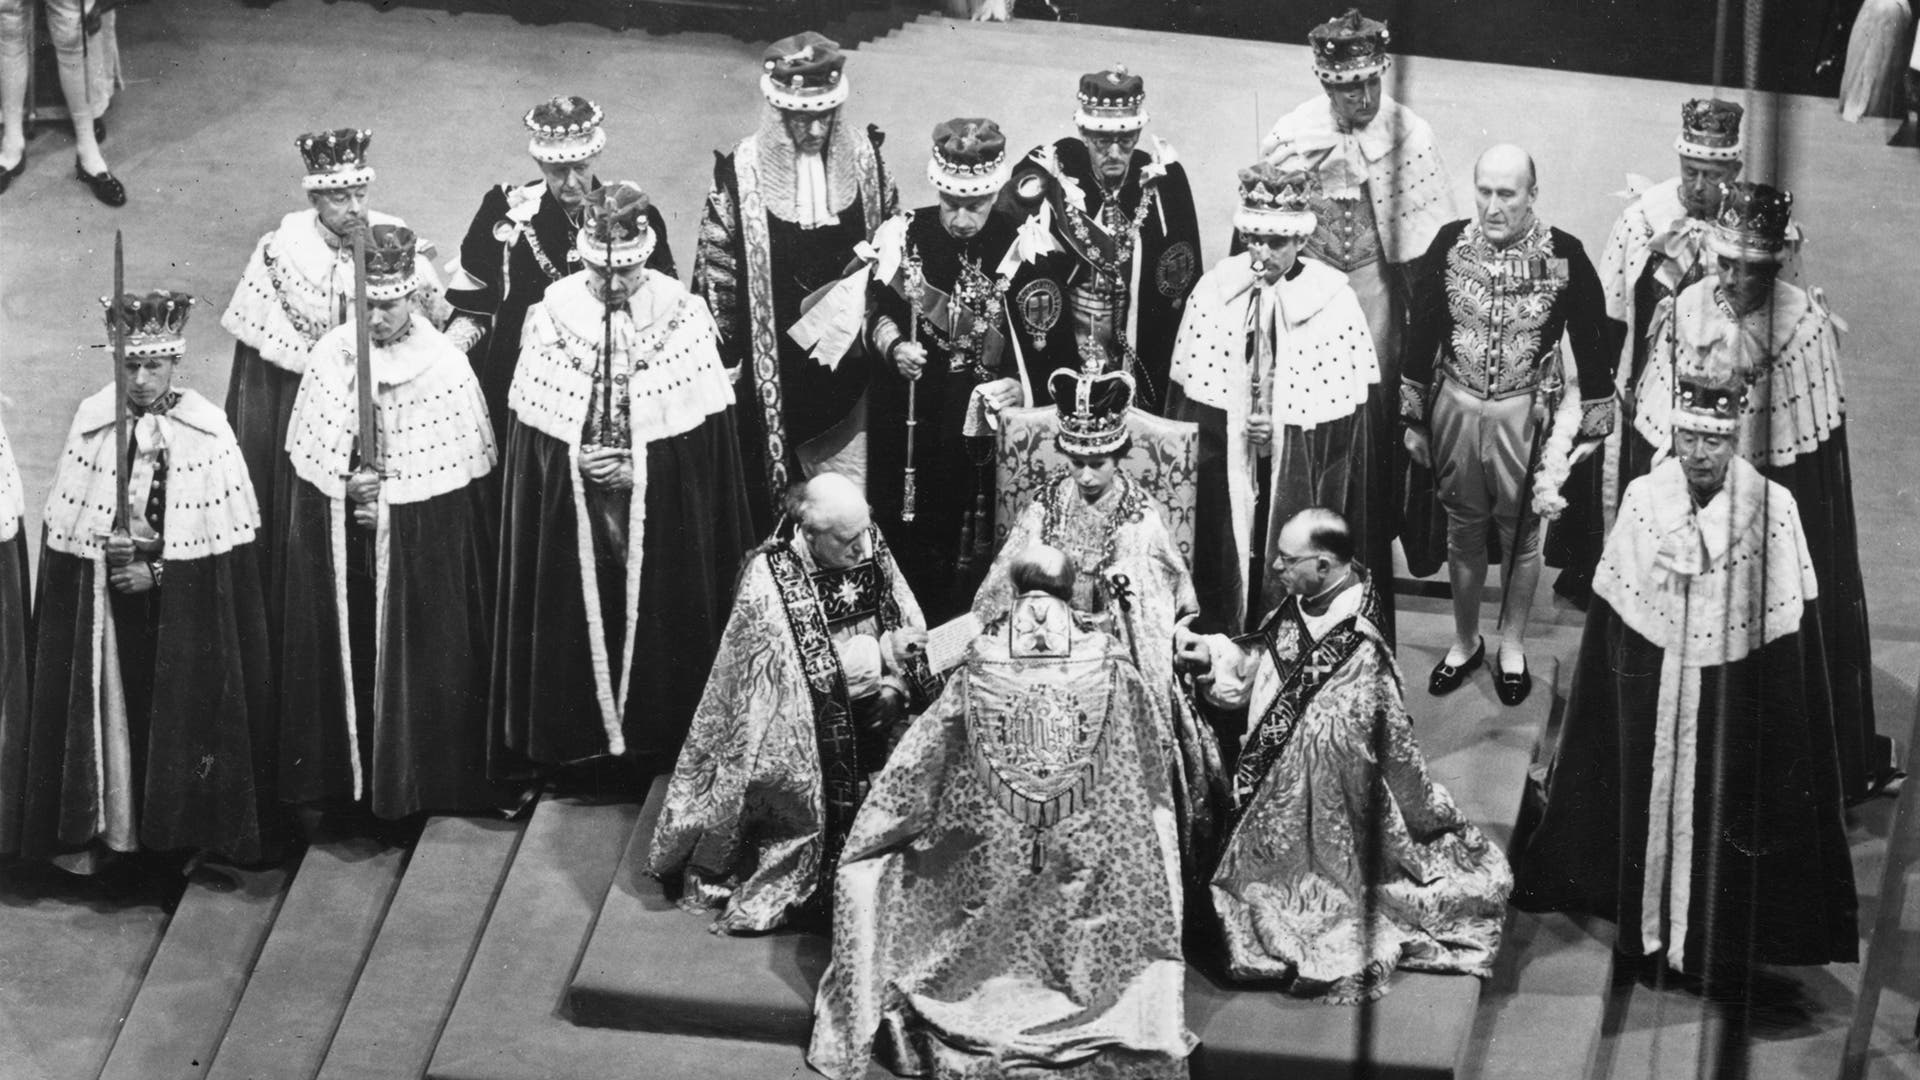 Queen Elizabeth II seated on a throne in Westminster Abbey during her coronation on June 2, 1953.